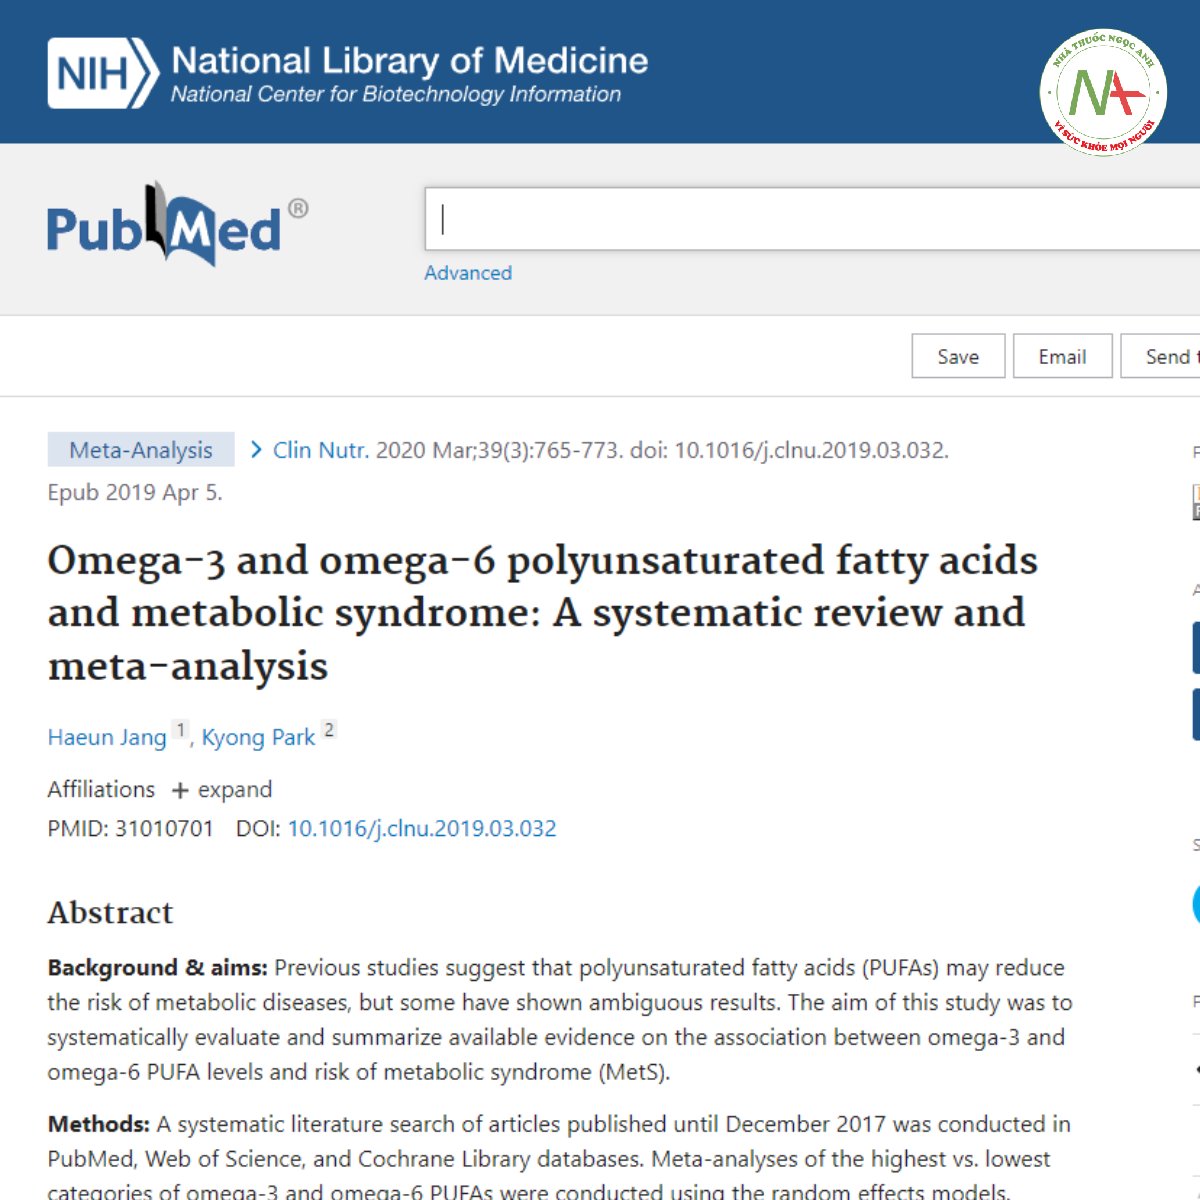 Omega-3 and omega-6 polyunsaturated fatty acids and metabolic syndrome_ A systematic review and meta-analysis